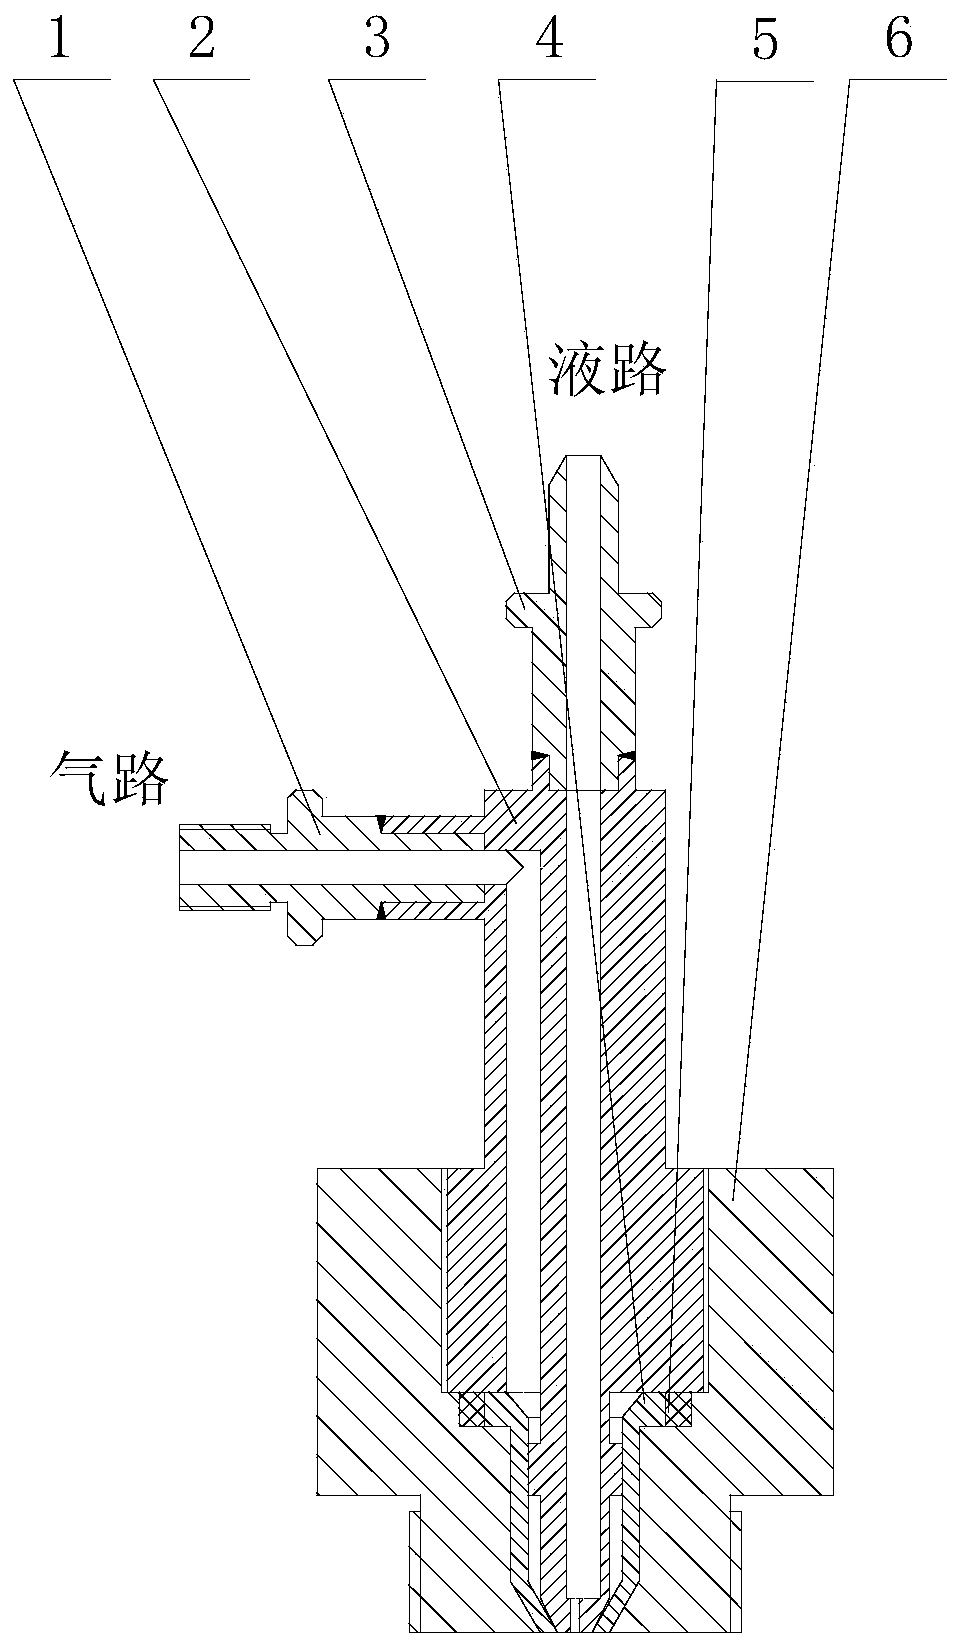 Ultrafine atomization nozzle applied to spray freeze drying device